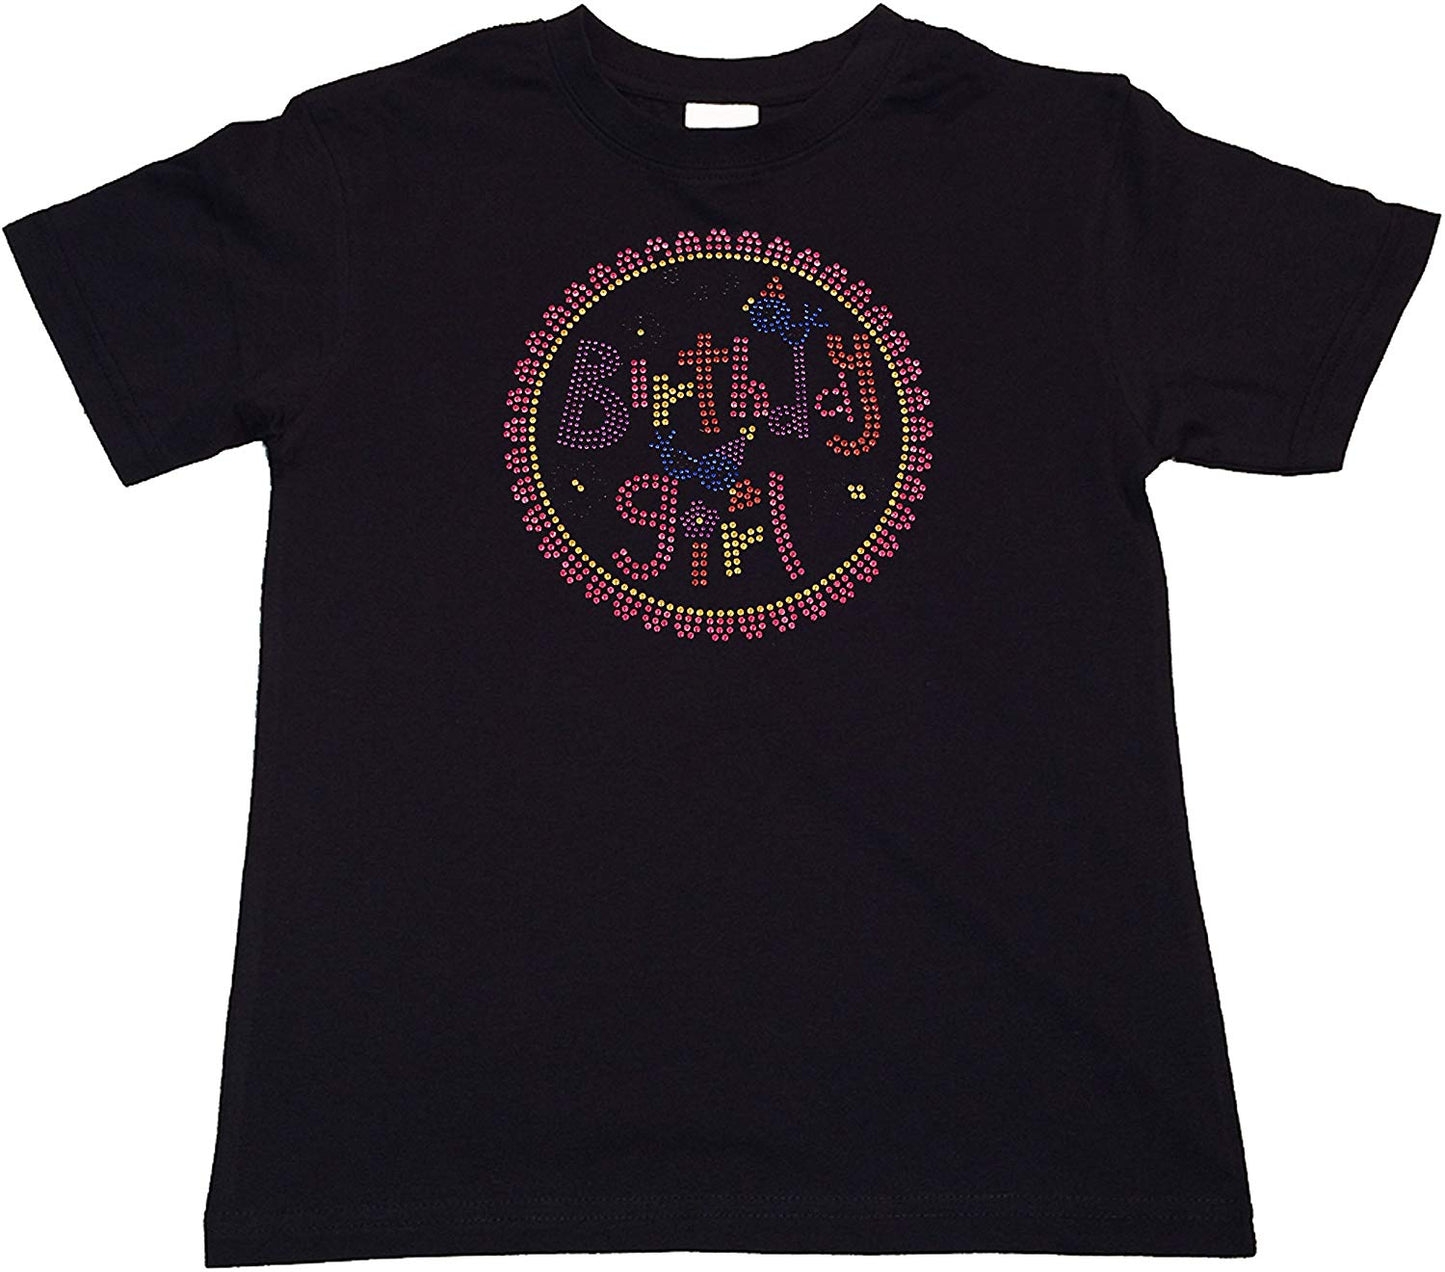 Girls Rhinestone T-Shirt " Birthday Girl with Circle in Rhinestuds " Kids Size 3 to 14 Available